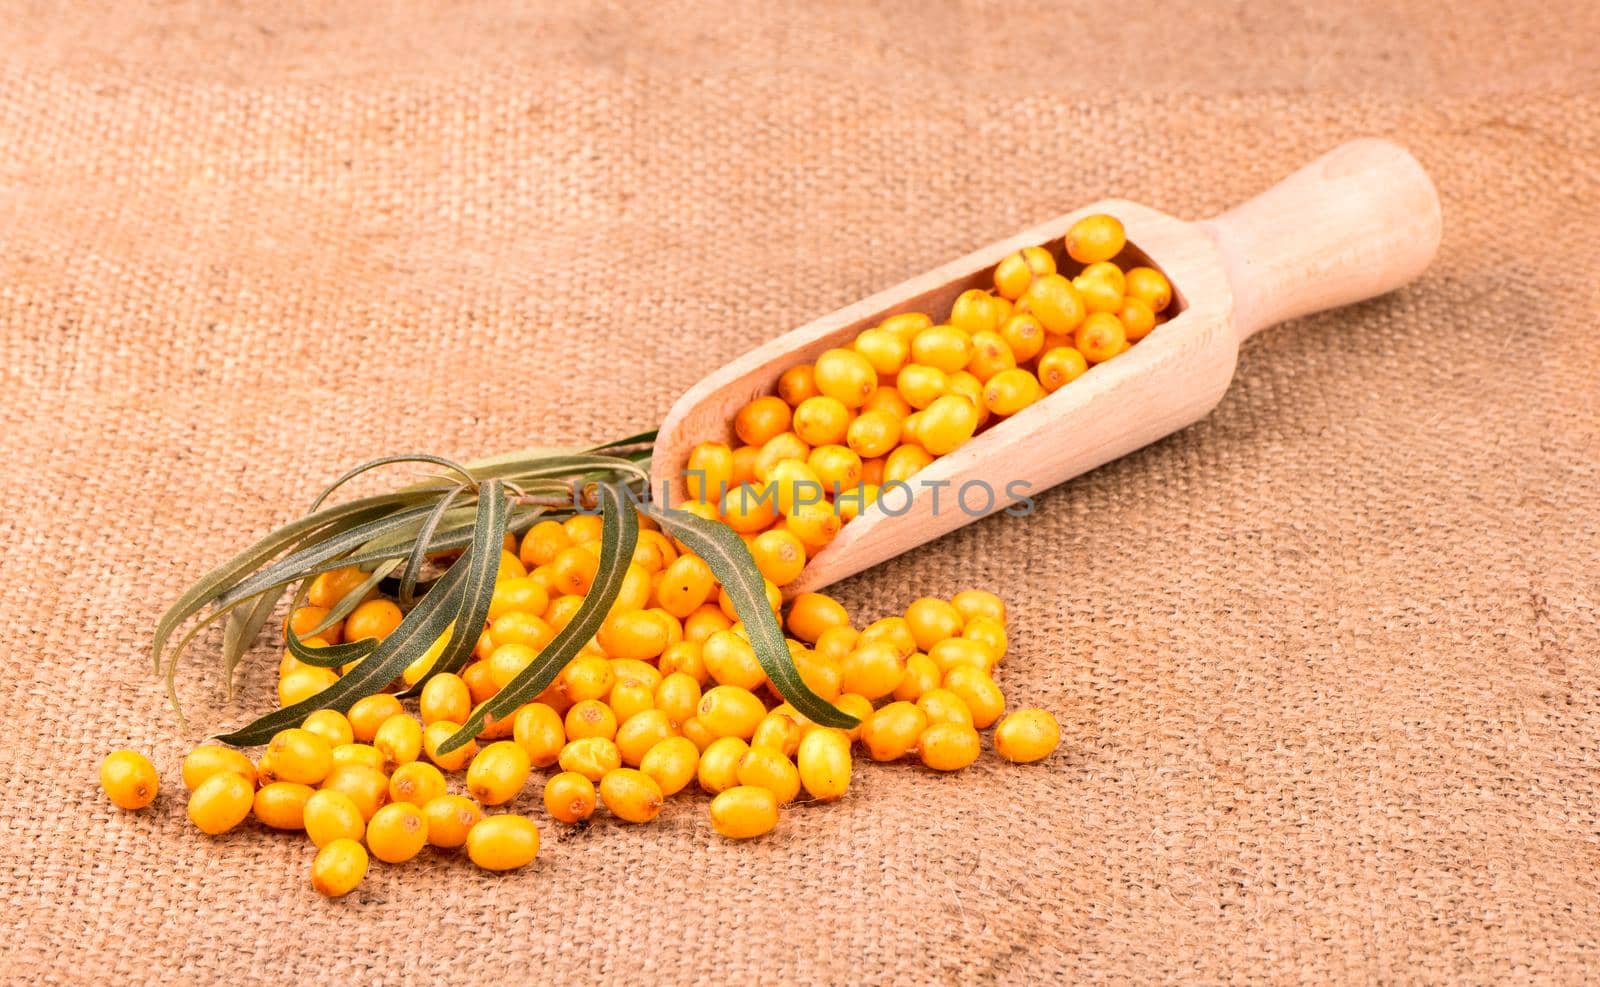 Fresh sea buckthorn berries in a wooden scoop with leaves on sacking